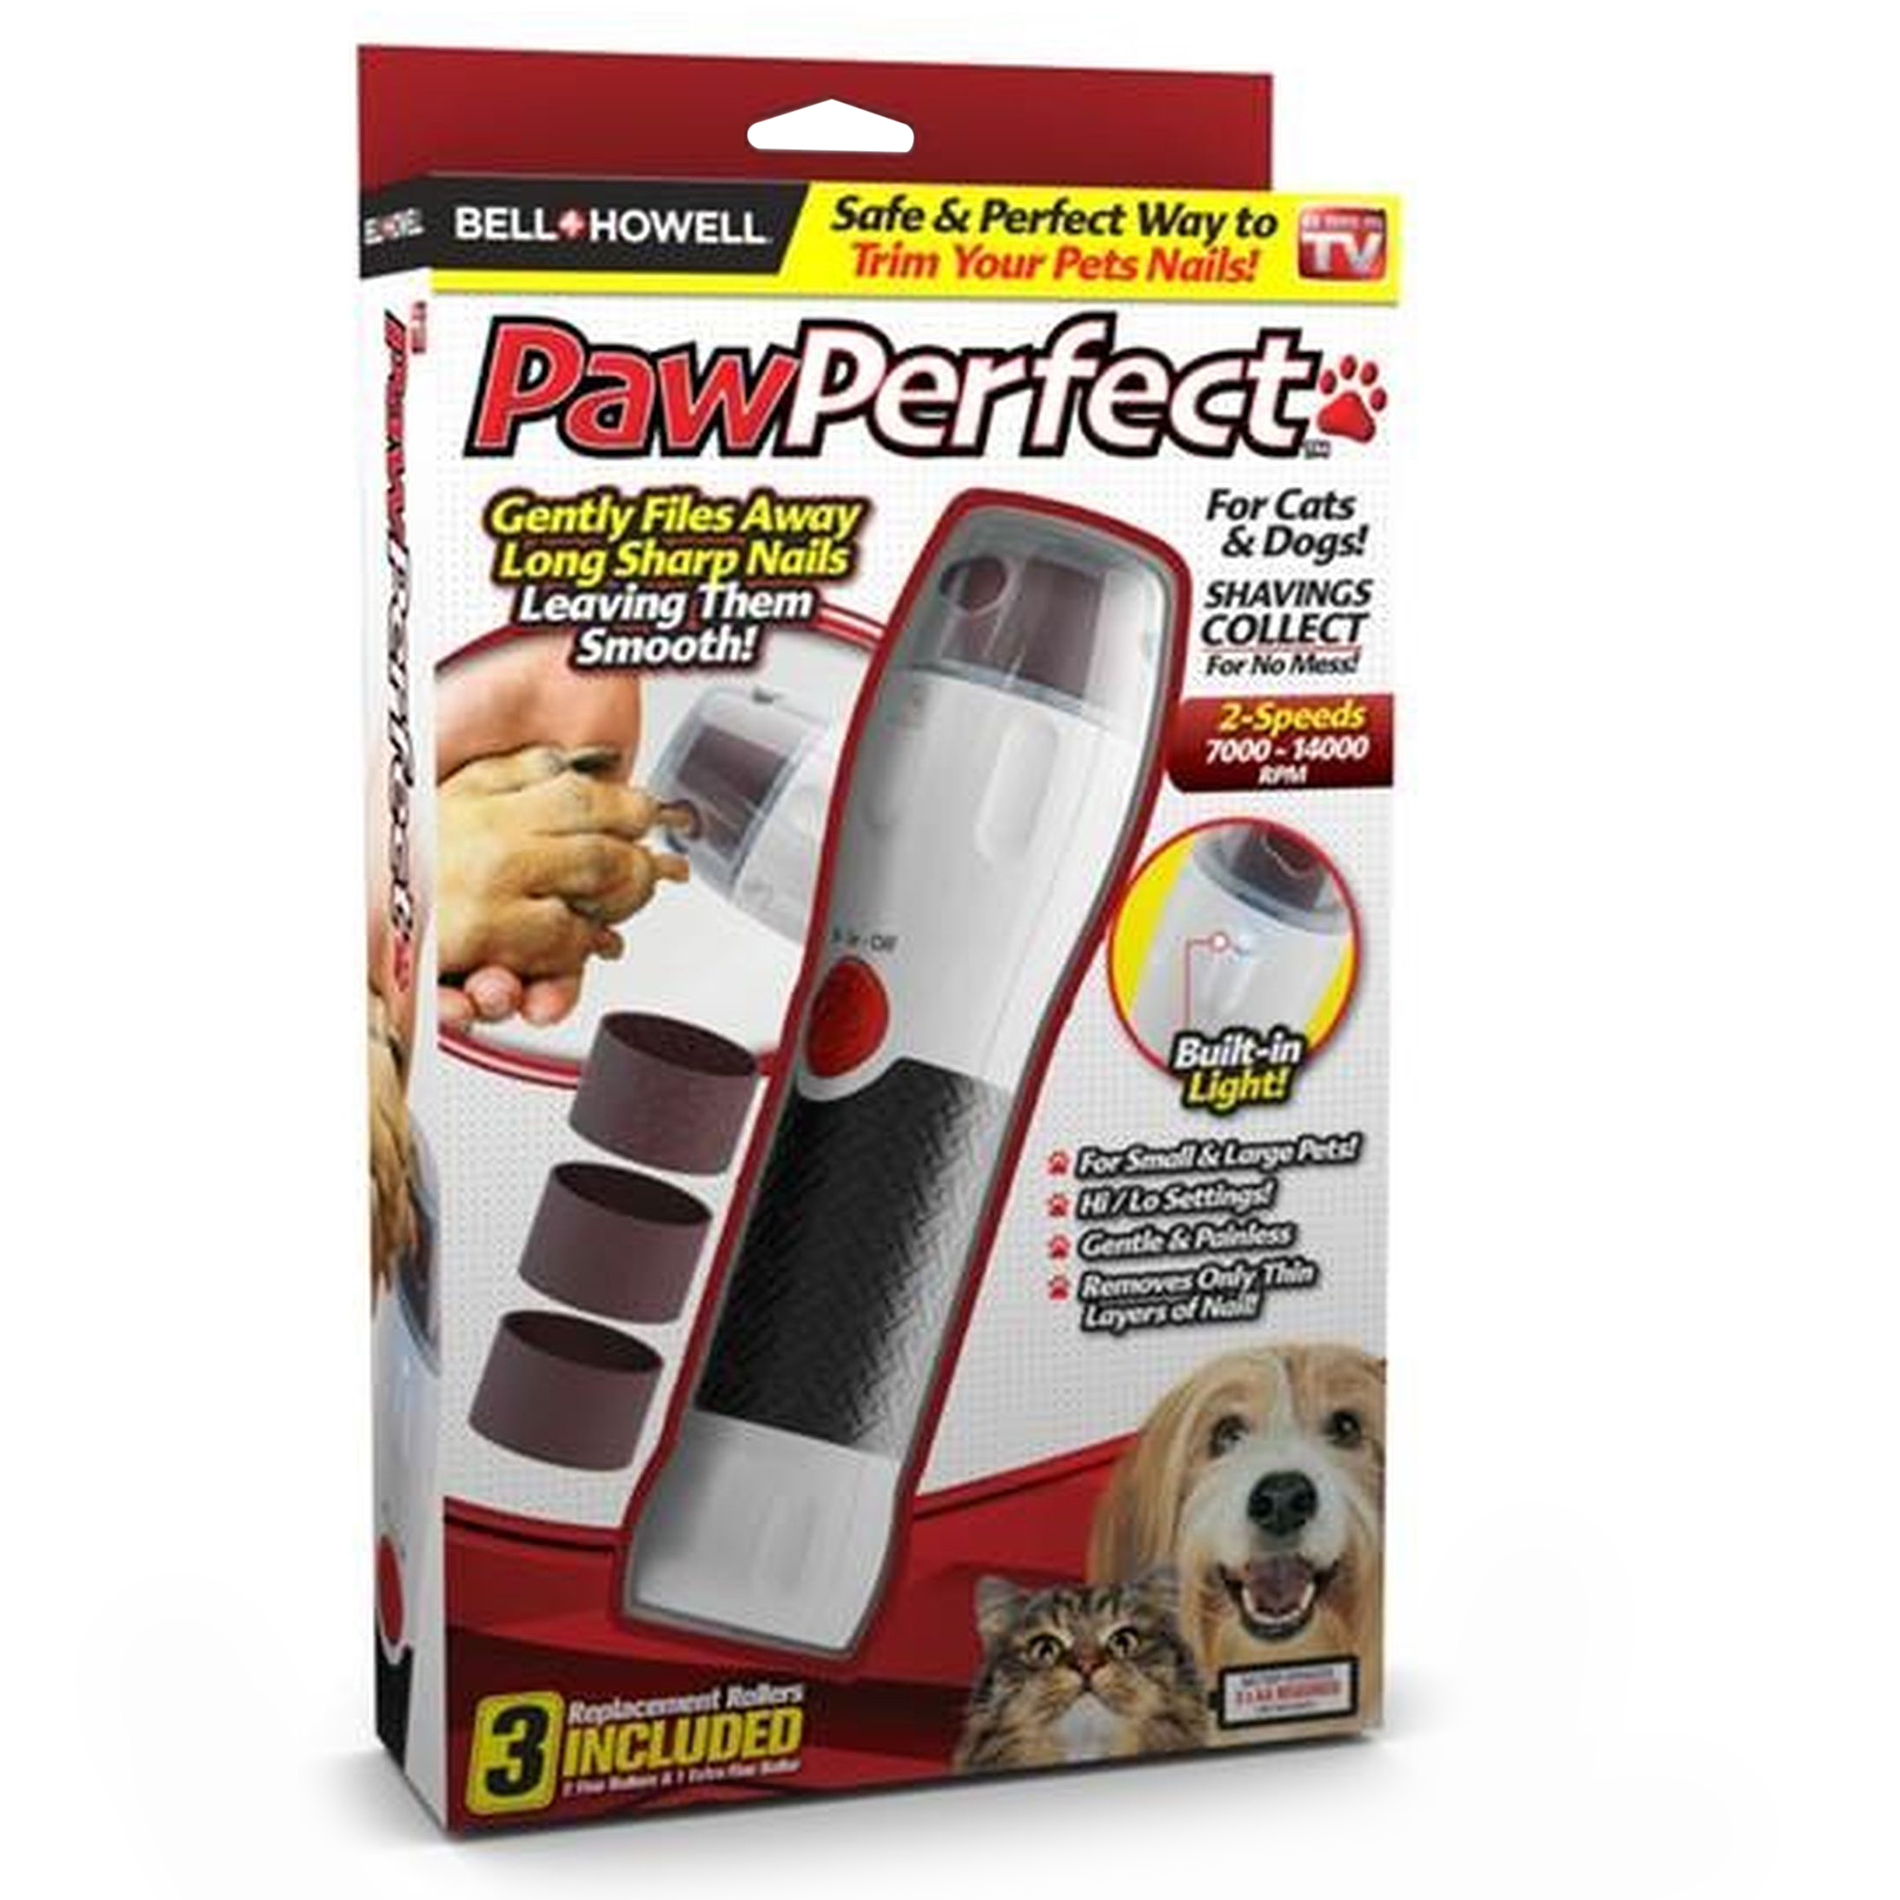 As Seen On TV Bell + Howell Paw Perfect